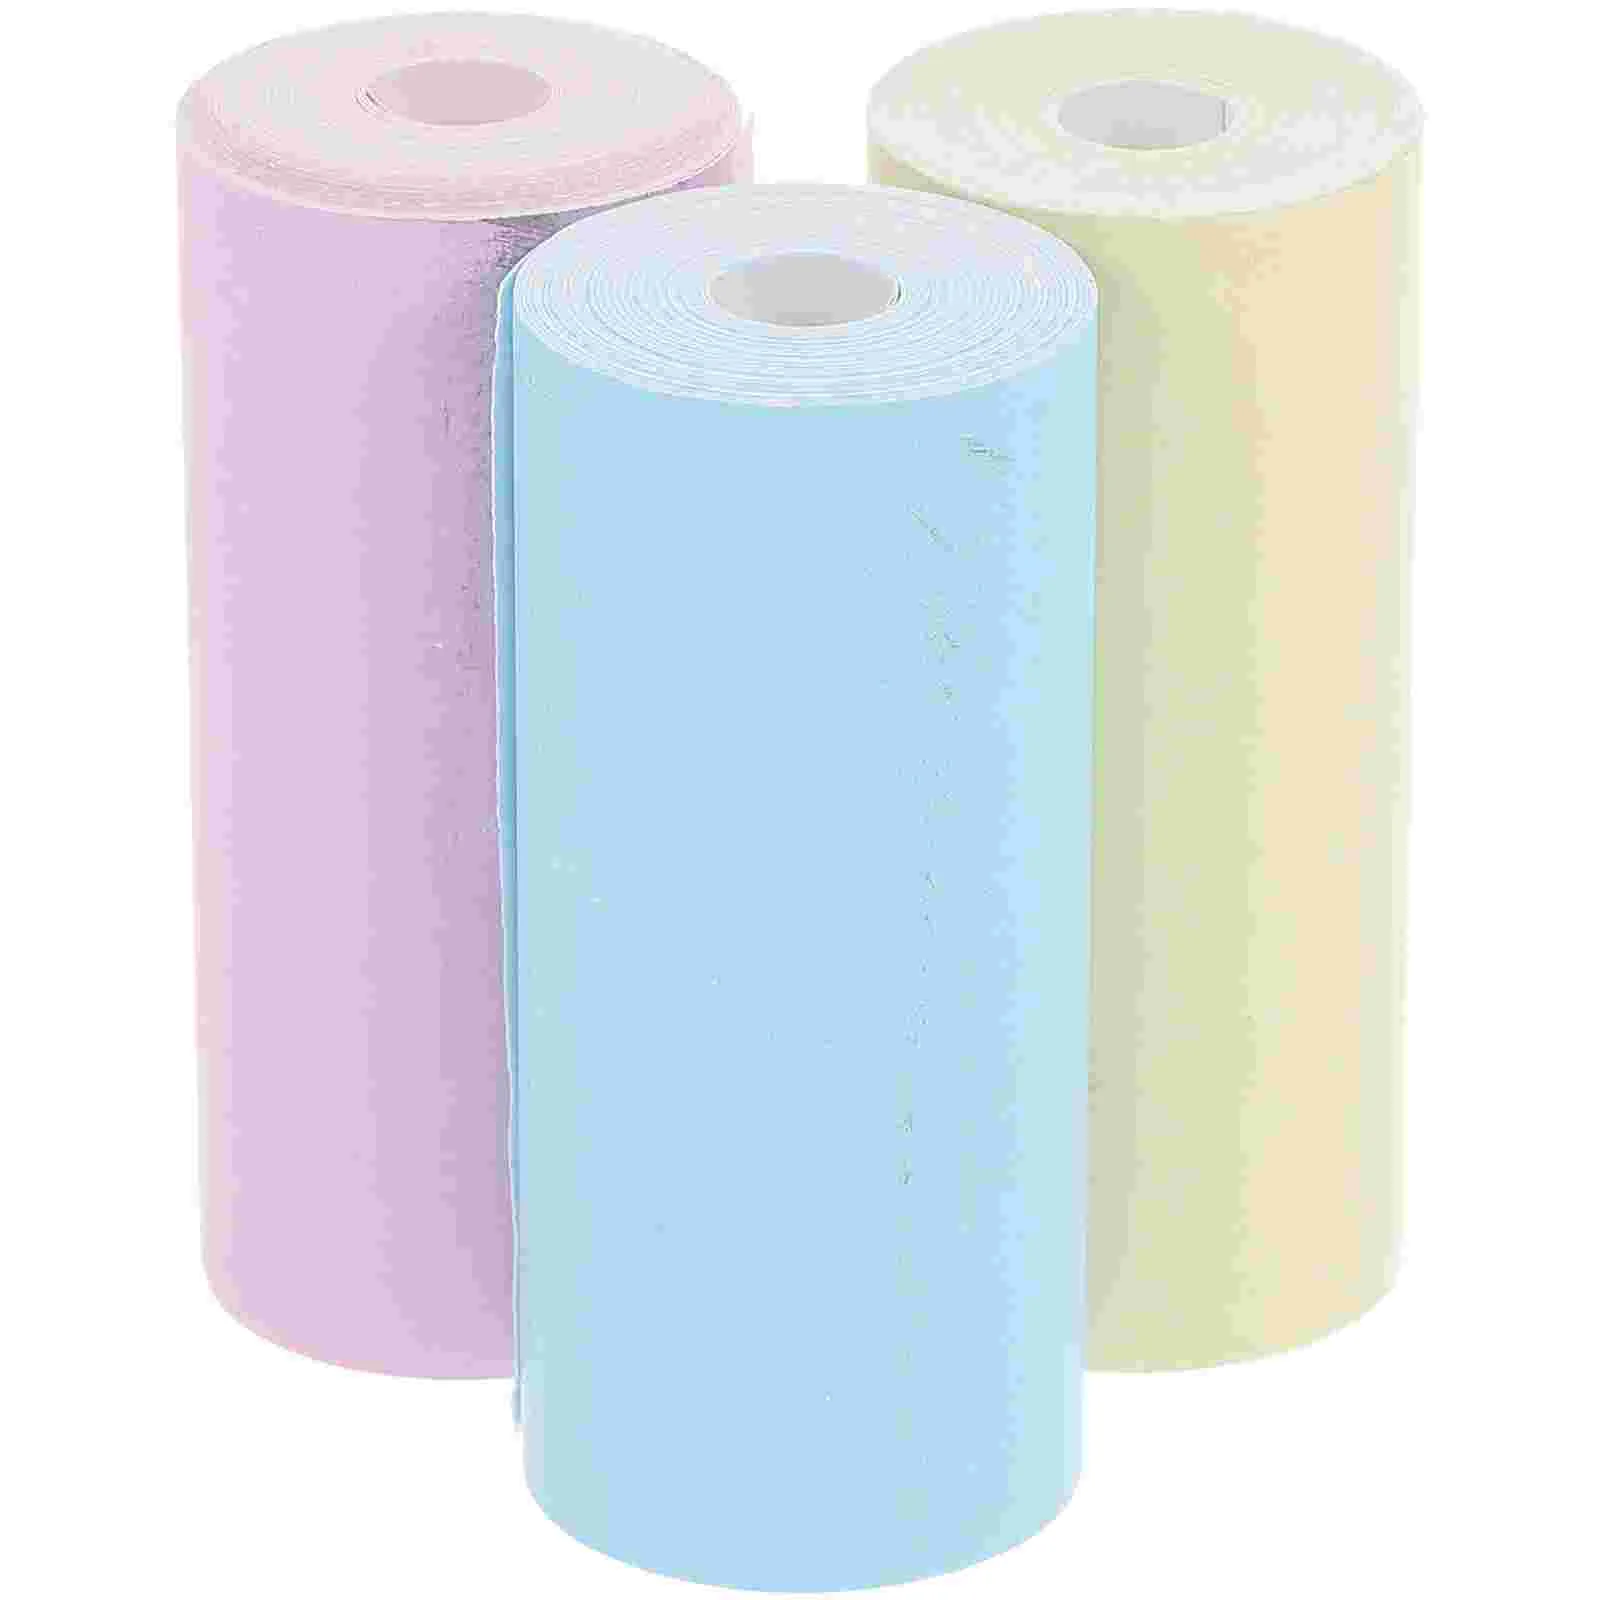 

3 Rolls of Multi-function Correction Stickers Removable Correction Decals Writing Correction Papers